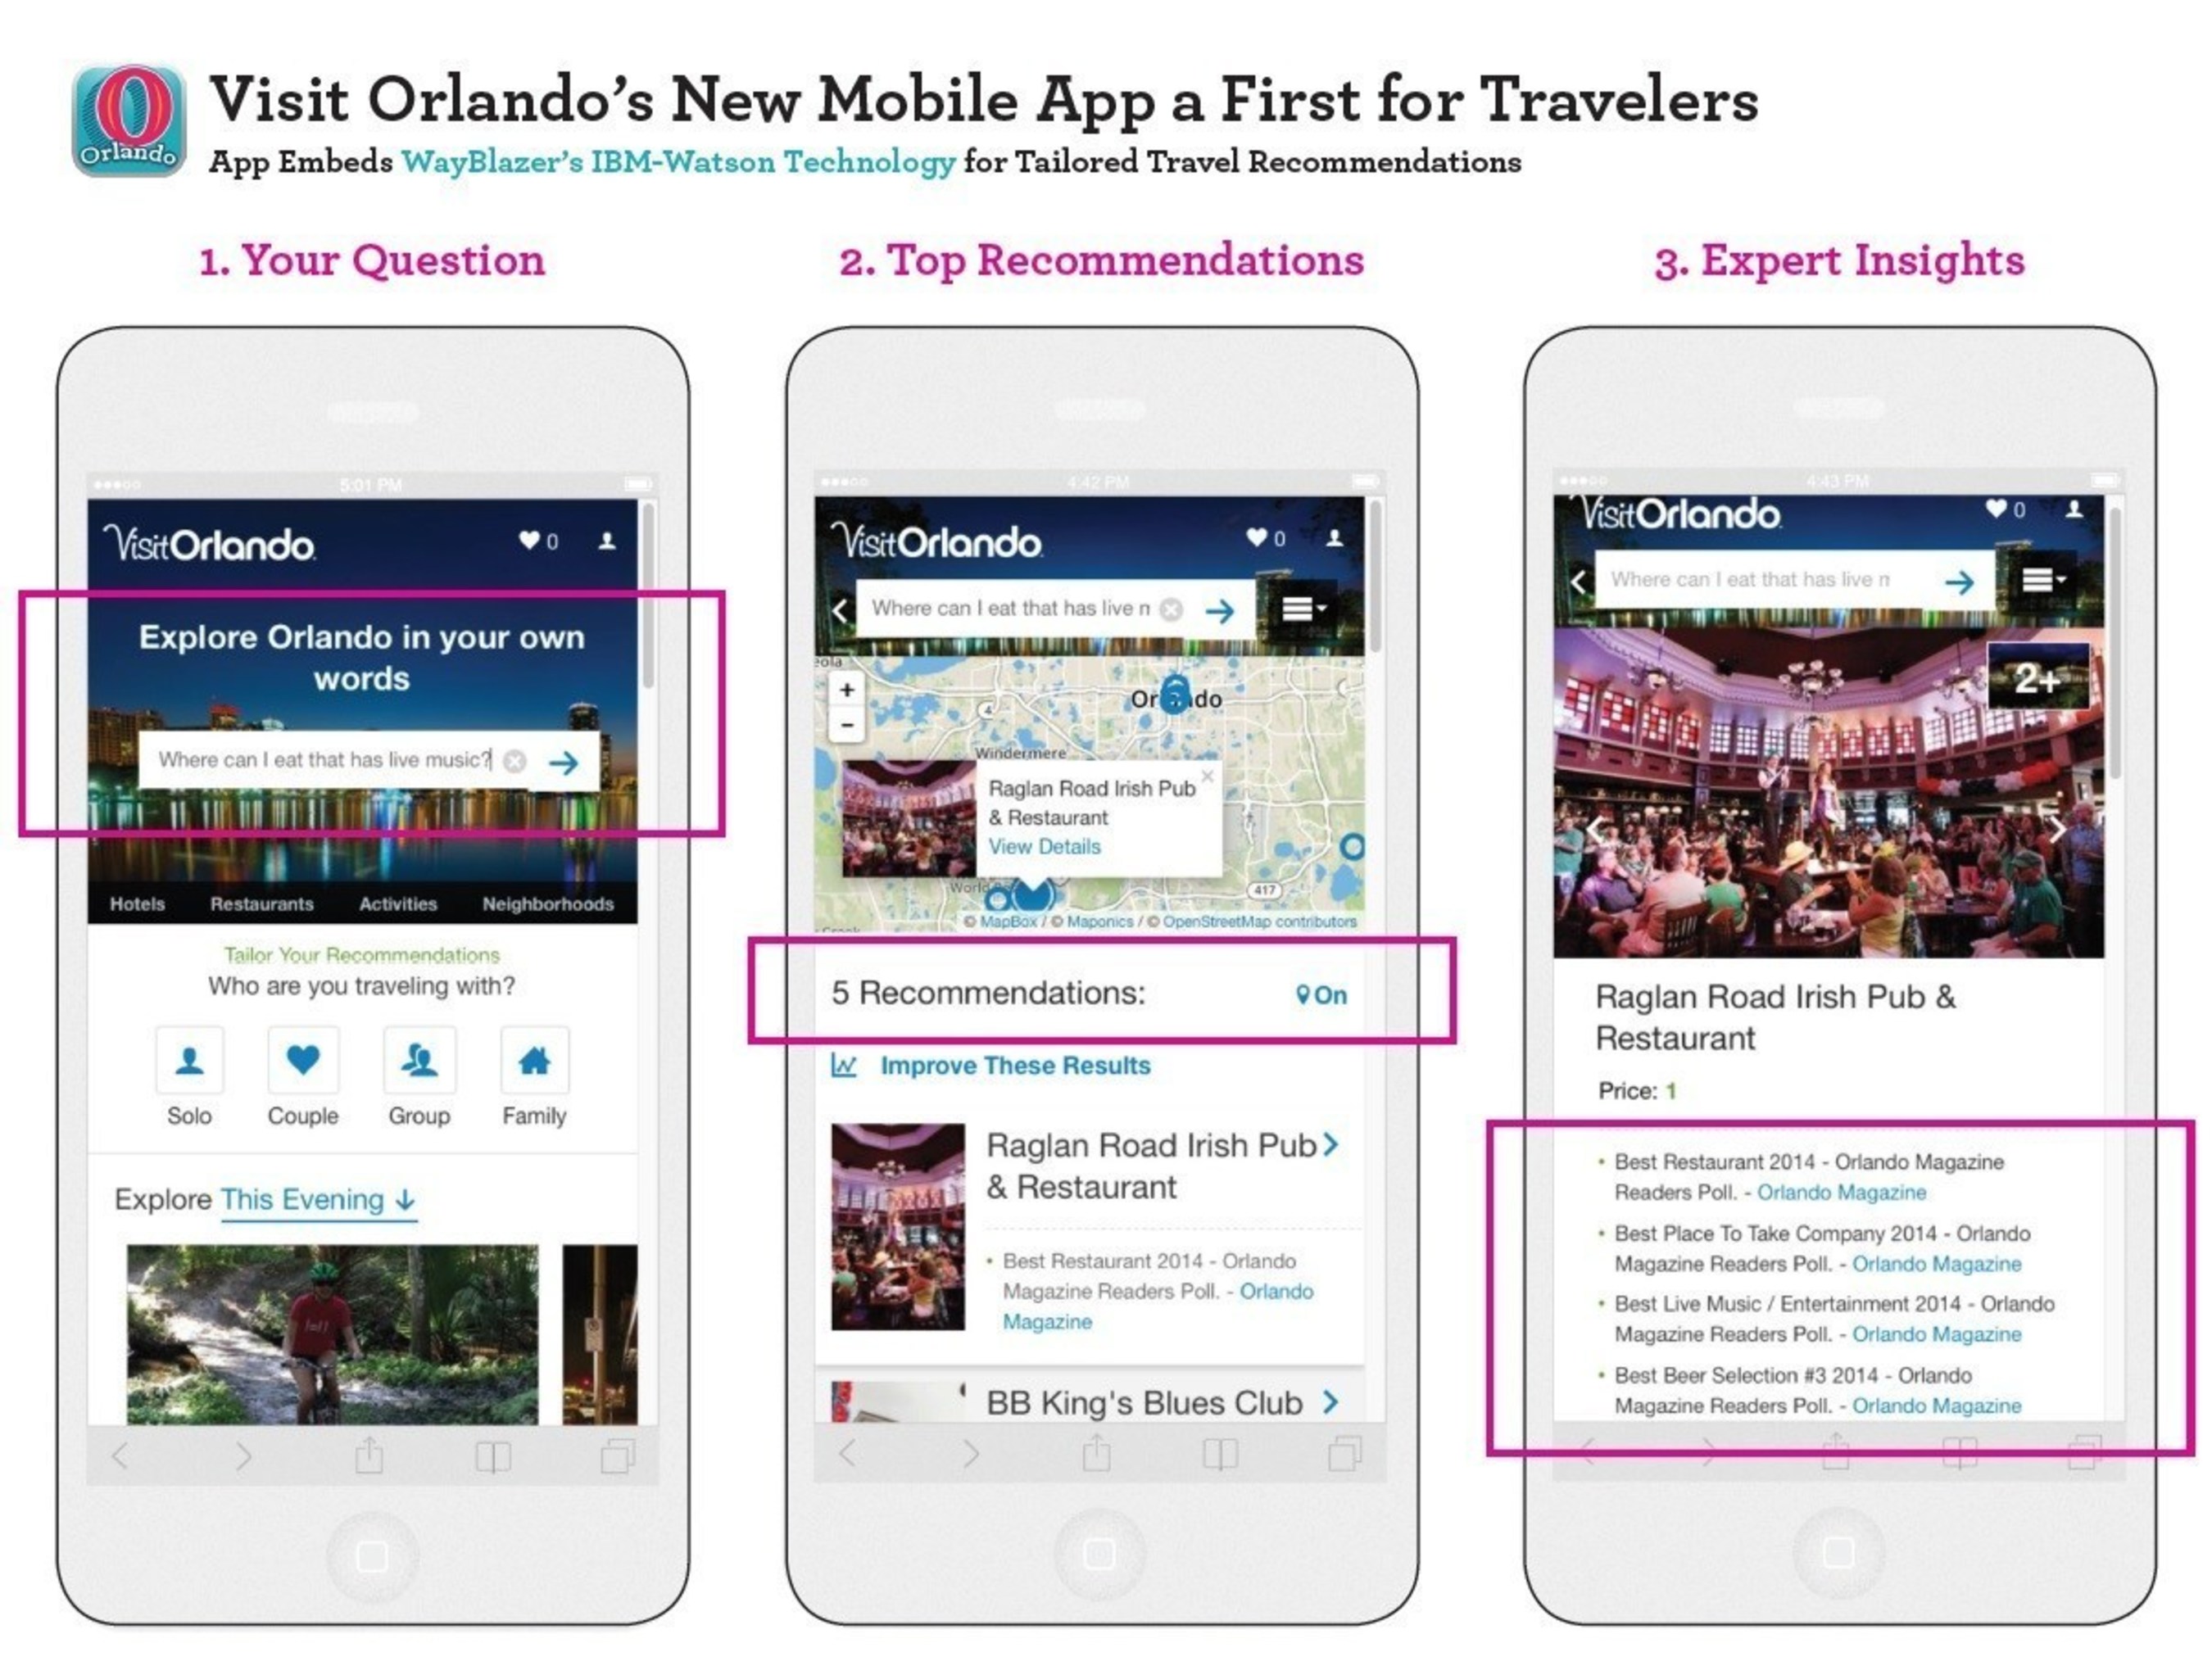 Visit Orlando's new app taps IBM Watson's artificial intelligence to understand conversational language from users and offer personalized recommendations of Orlando experiences that best fit an individual's needs and preferences.